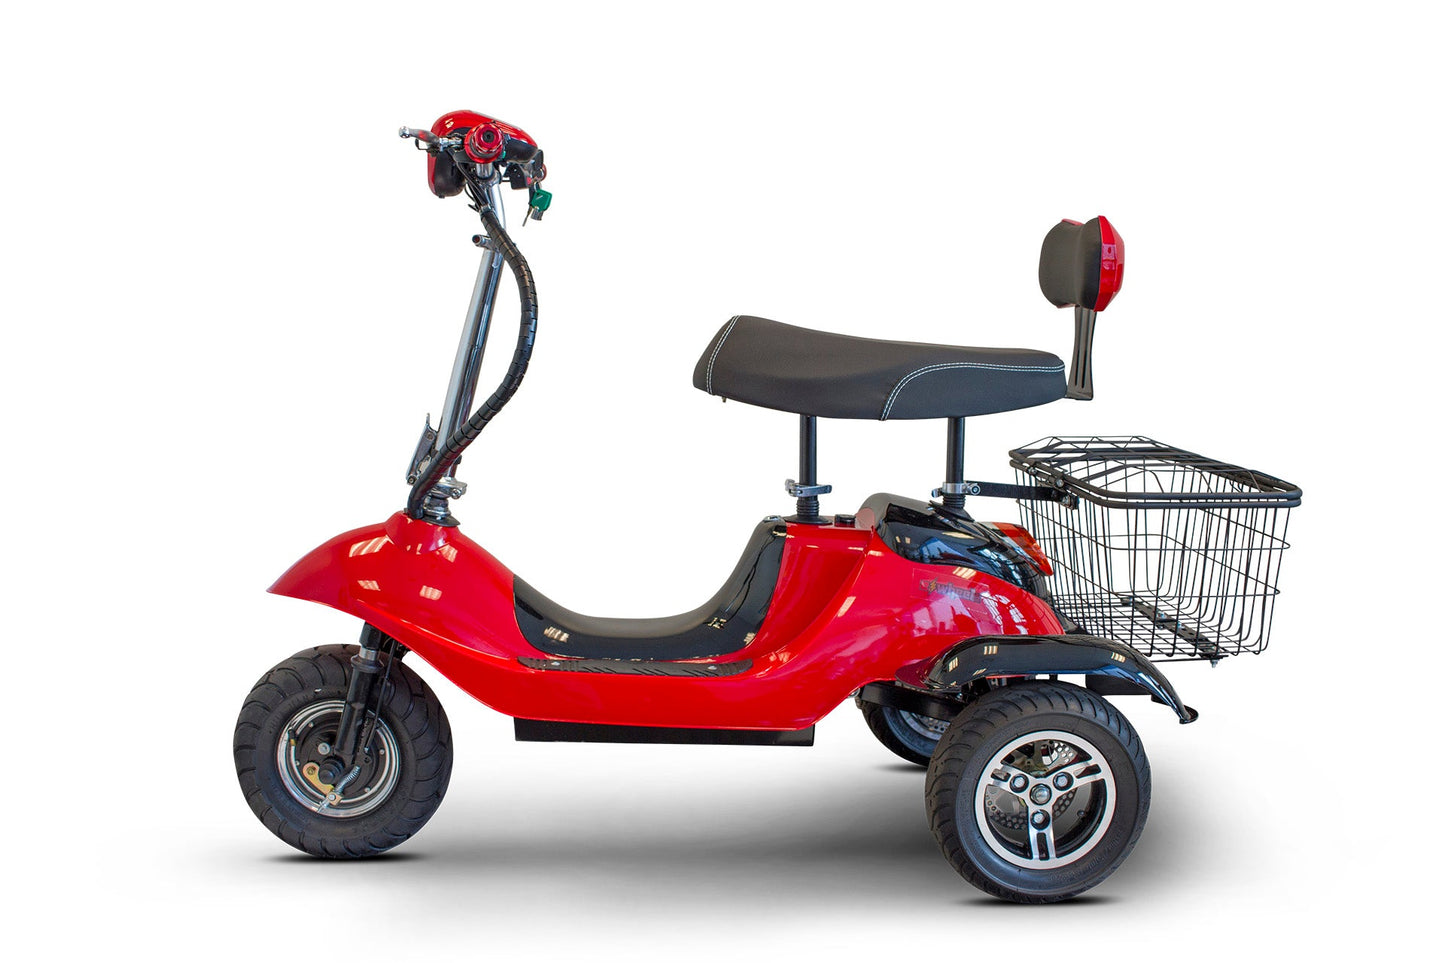 EWheels EW-19 Electric Scooter: The Affordable, High-Performance Mobility Solution EWheels